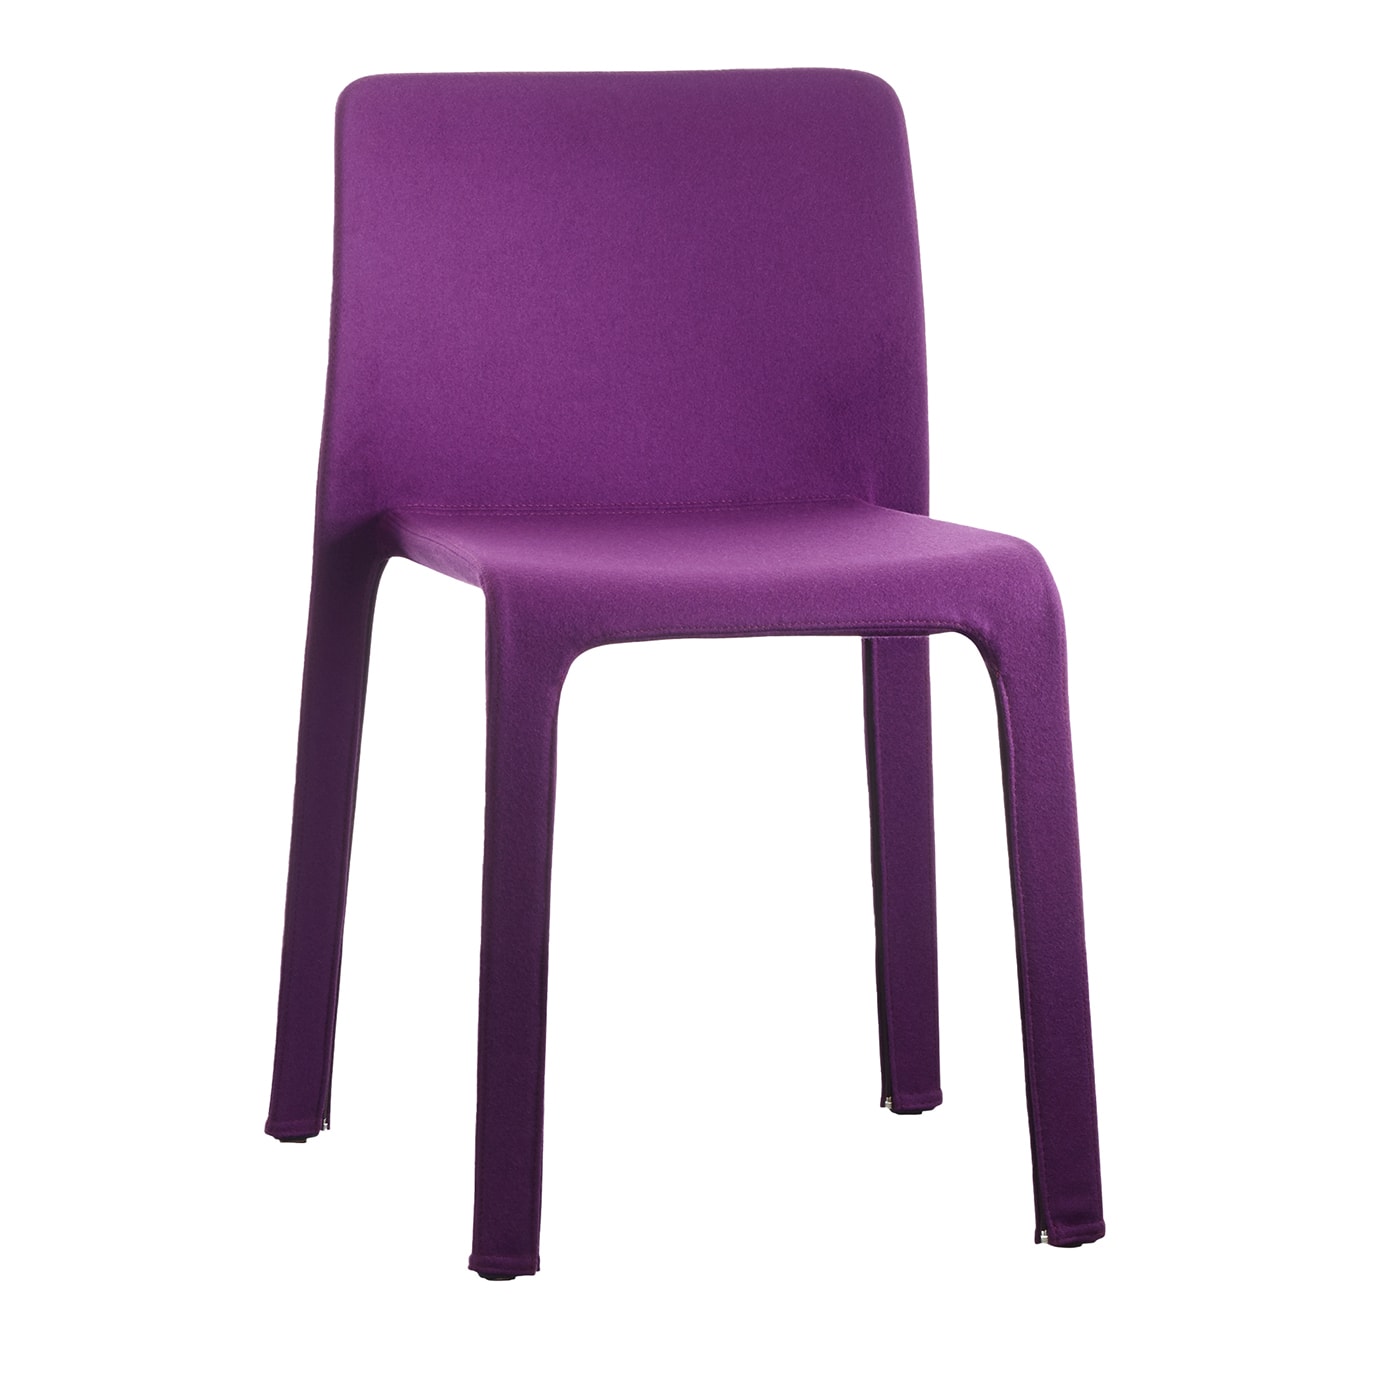 First Dressed Purple Chair by Stefano Giovannoni - Magis